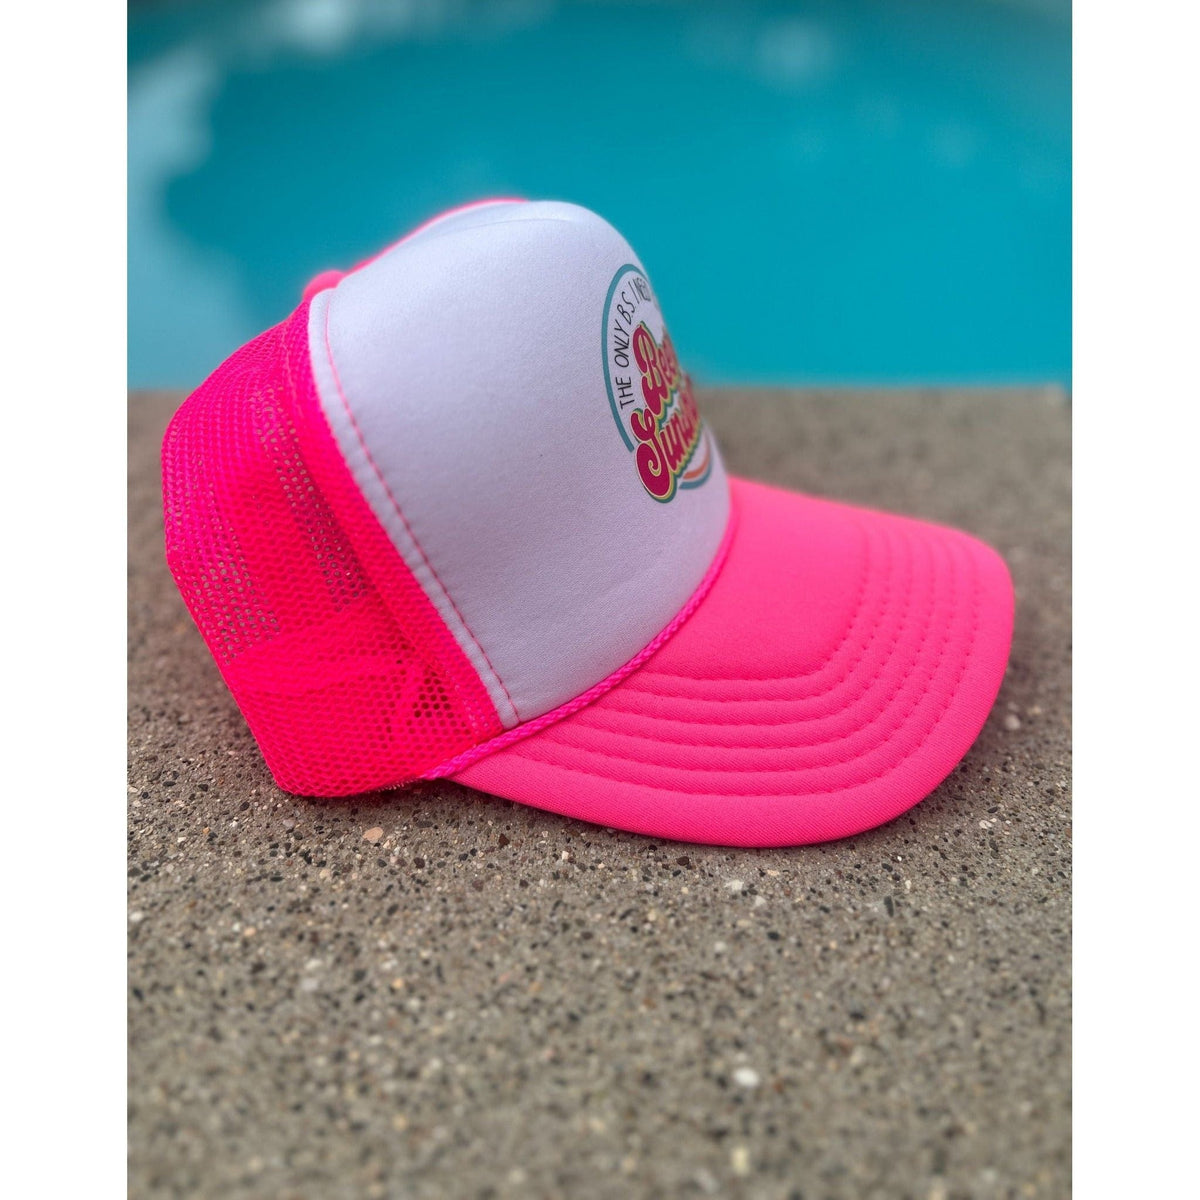 Beer & Sunshine | White and Pink Trucker Hat by Haute Sheet Hats TheFringeCultureCollective